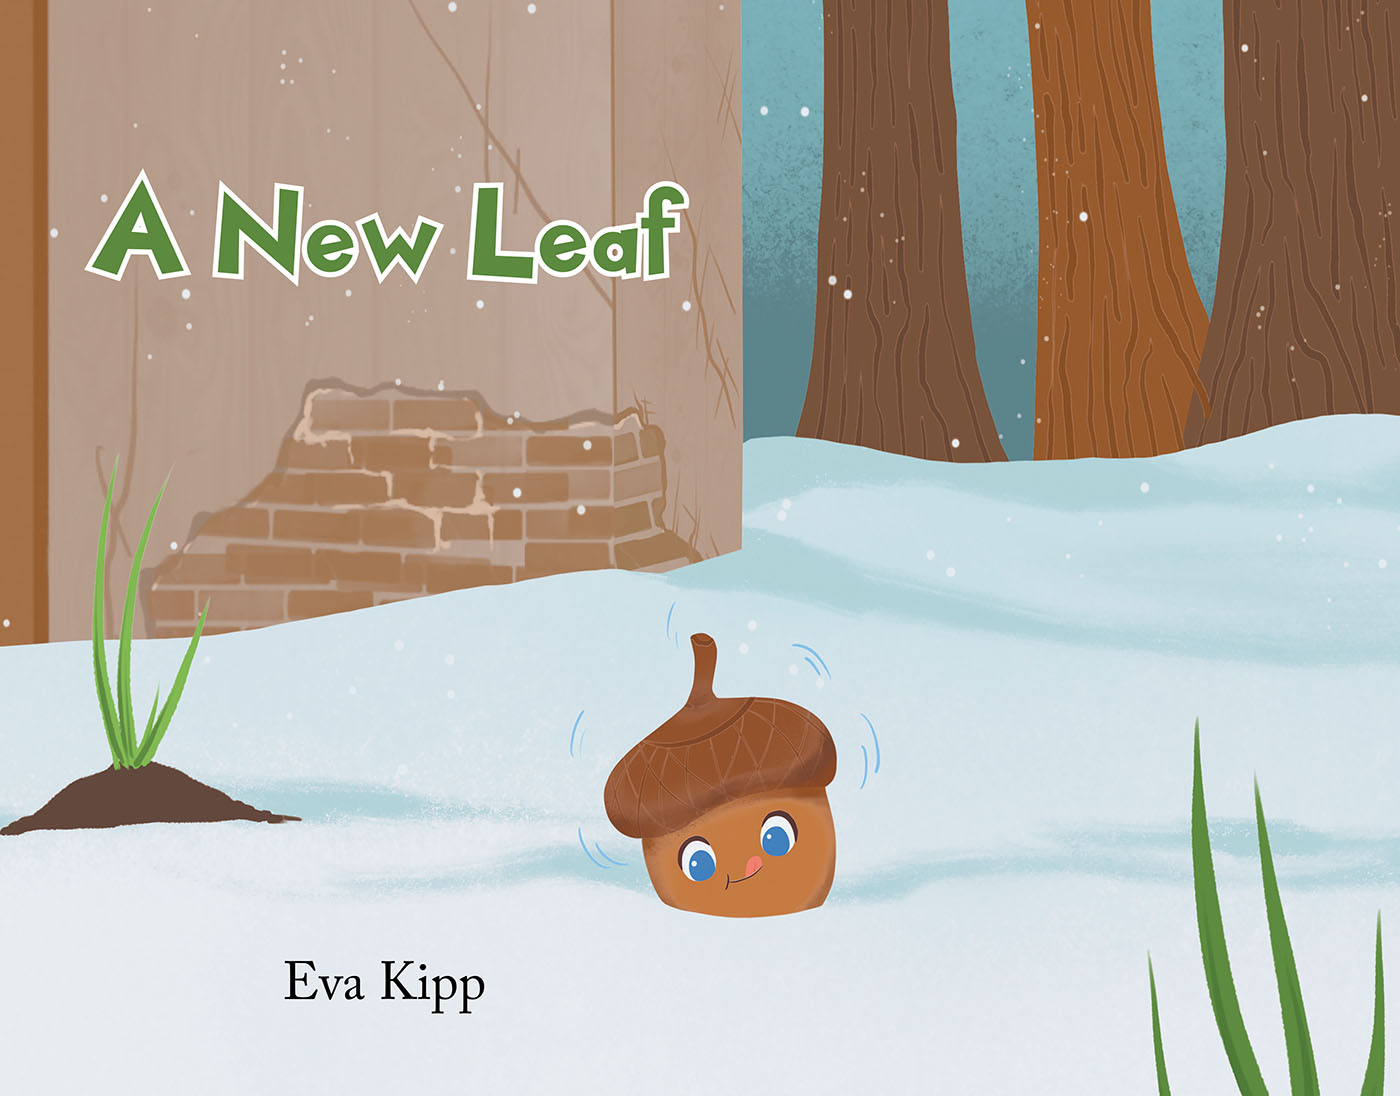 Eva Kipp’s Newly Released "A New Leaf" is a Sweet Story of an Acorn’s Challenging and Uplifting Journey to Becoming a Strong Oak Tree